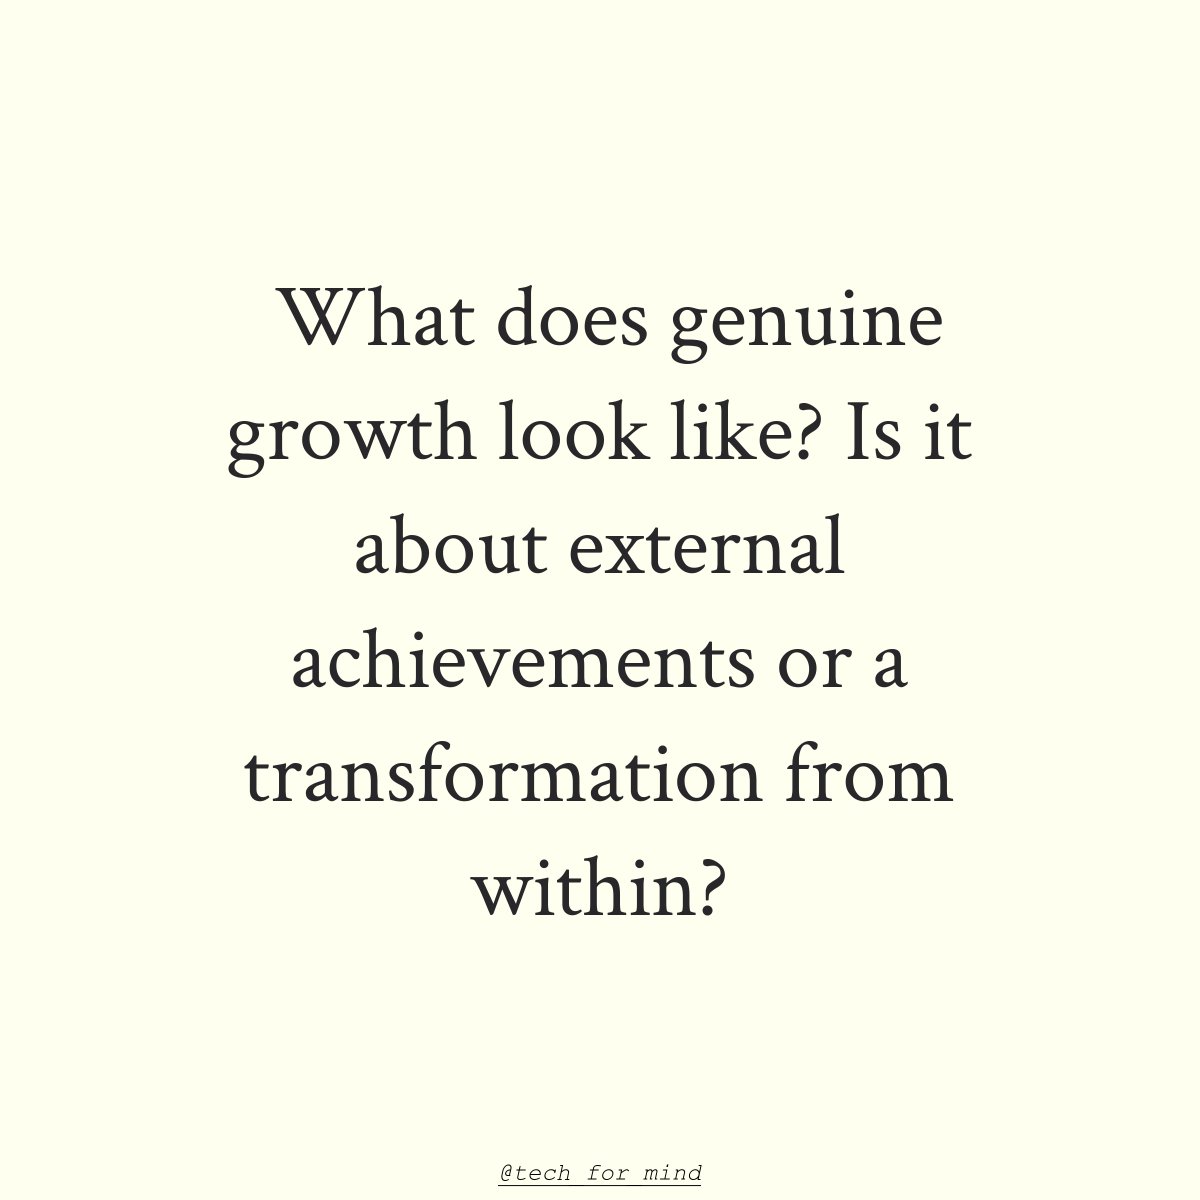 What's your take on true growth? 🌱 #PersonalDevelopment #InnerTransformation
#Growth #SelfImprovement